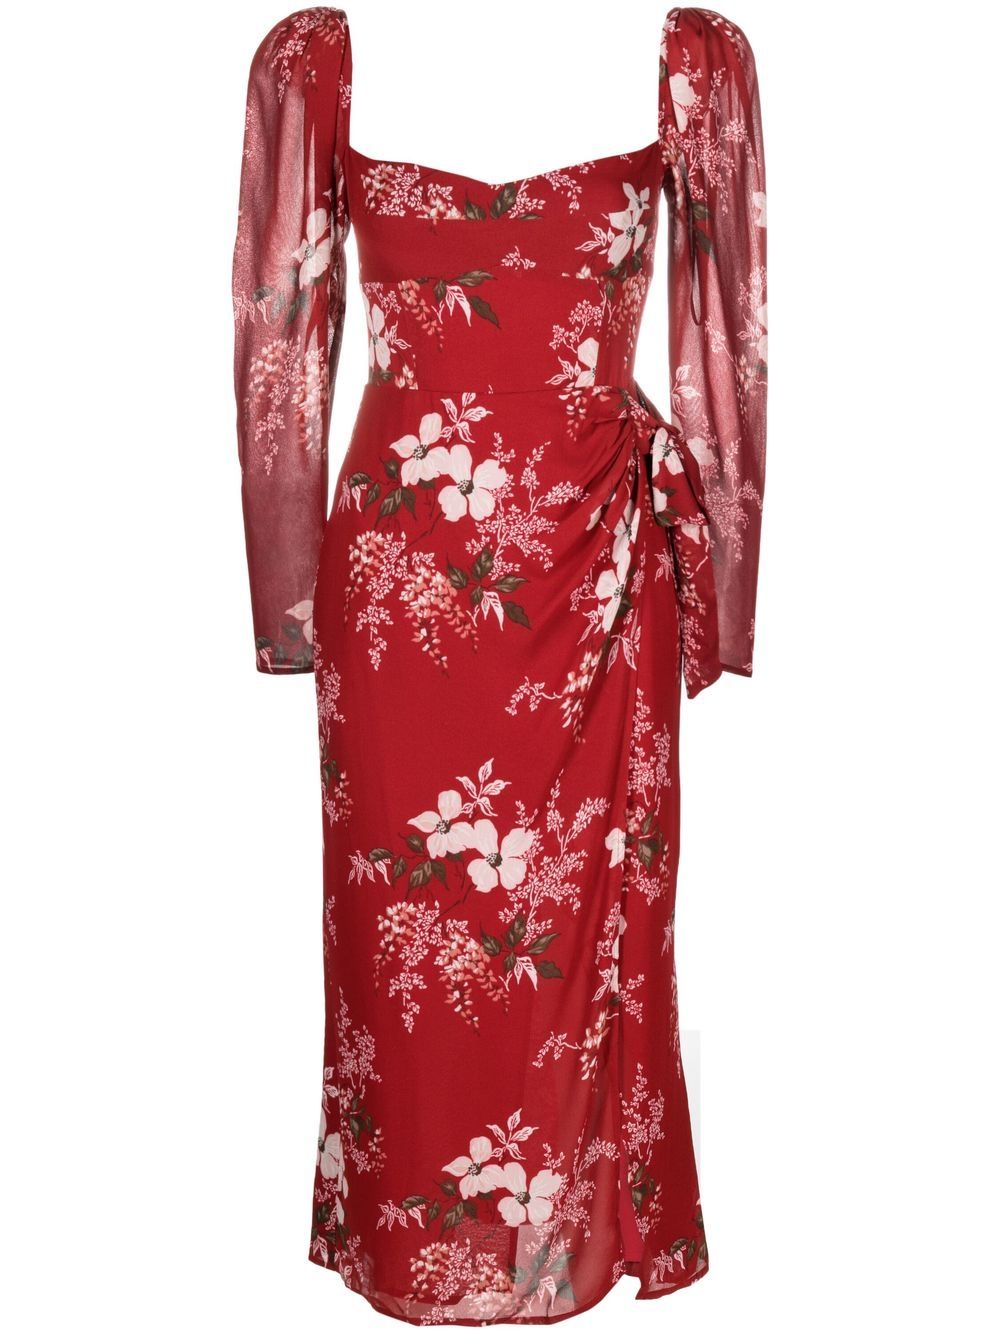 Reformation Theo floral-print dress - Red